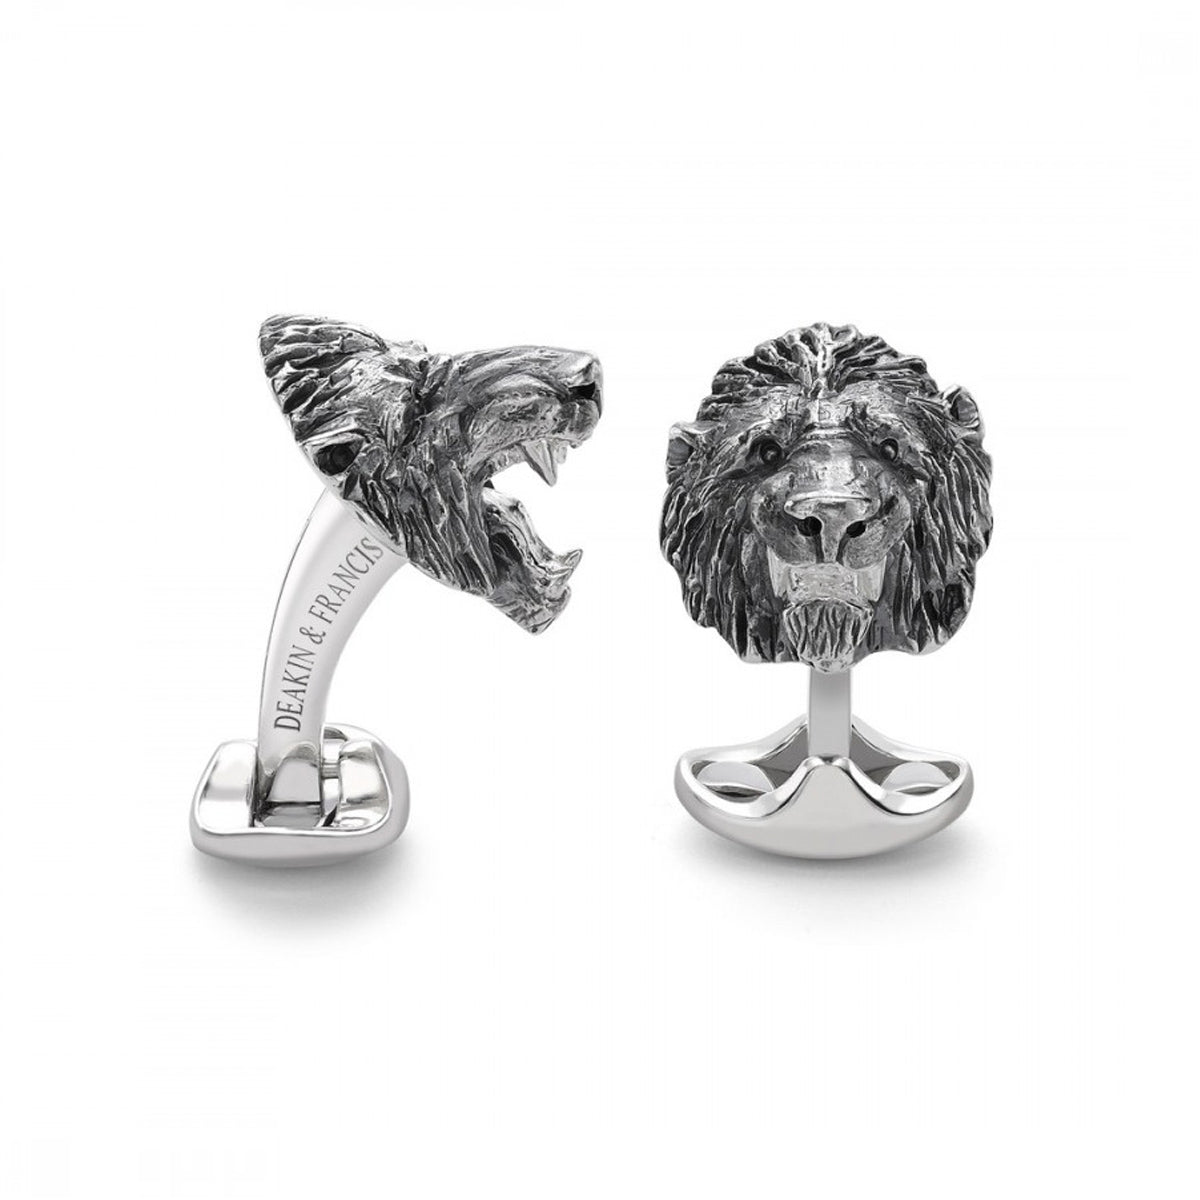 A pair of Sterling Silver Oxidised Lion Head Cufflinks